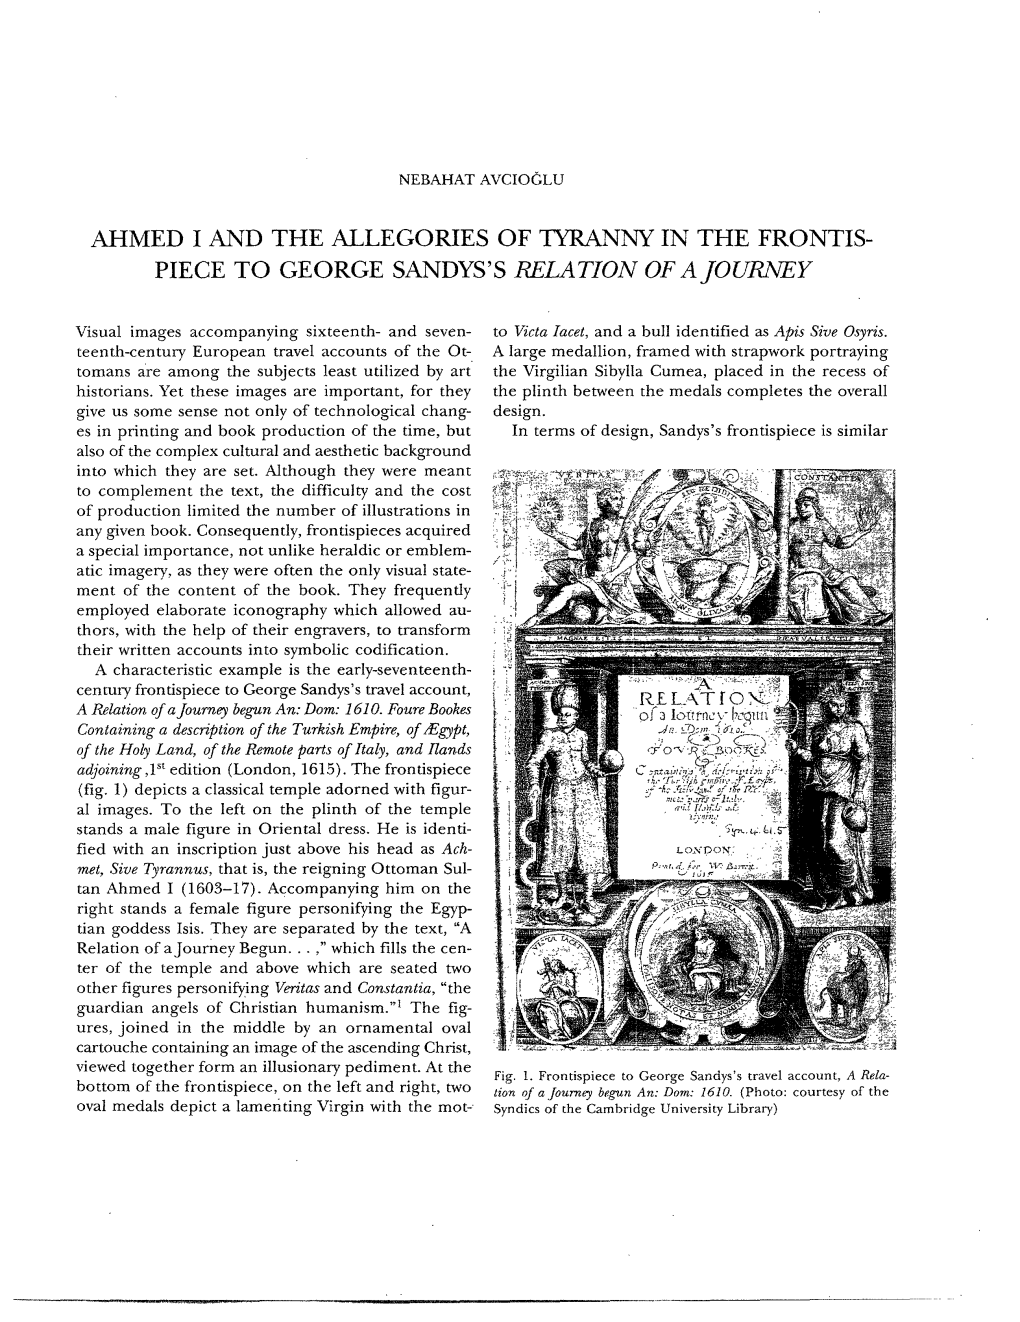 Ahmed I and the Allegories of Tyranny in the Frontis- Piece to George Sandys's Relation of a Journey